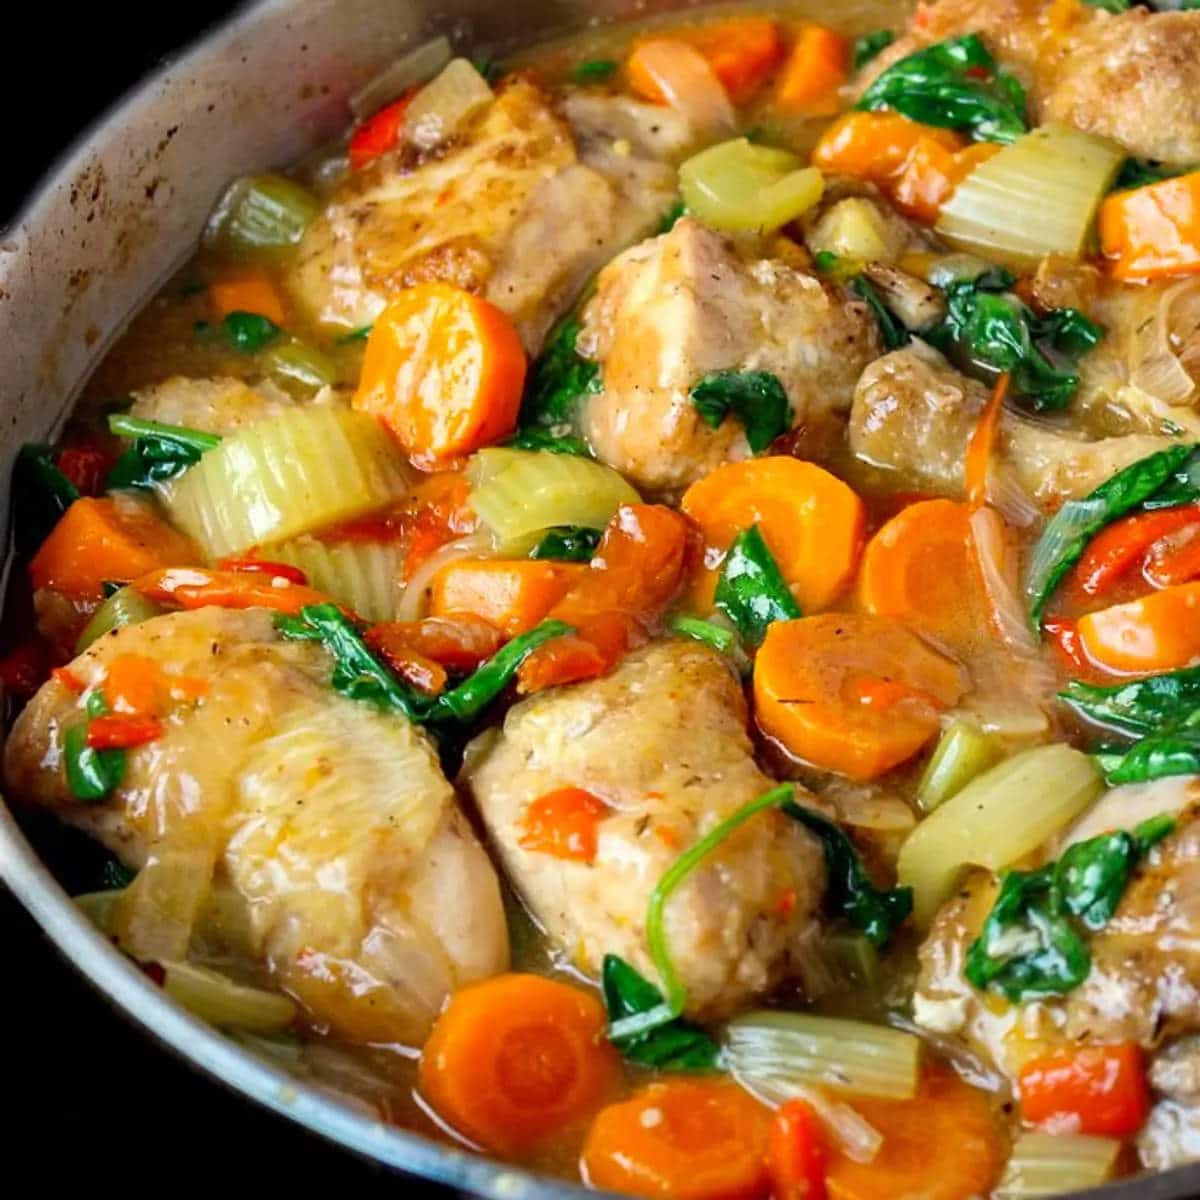 Skillet Smothered Chicken and Carrots